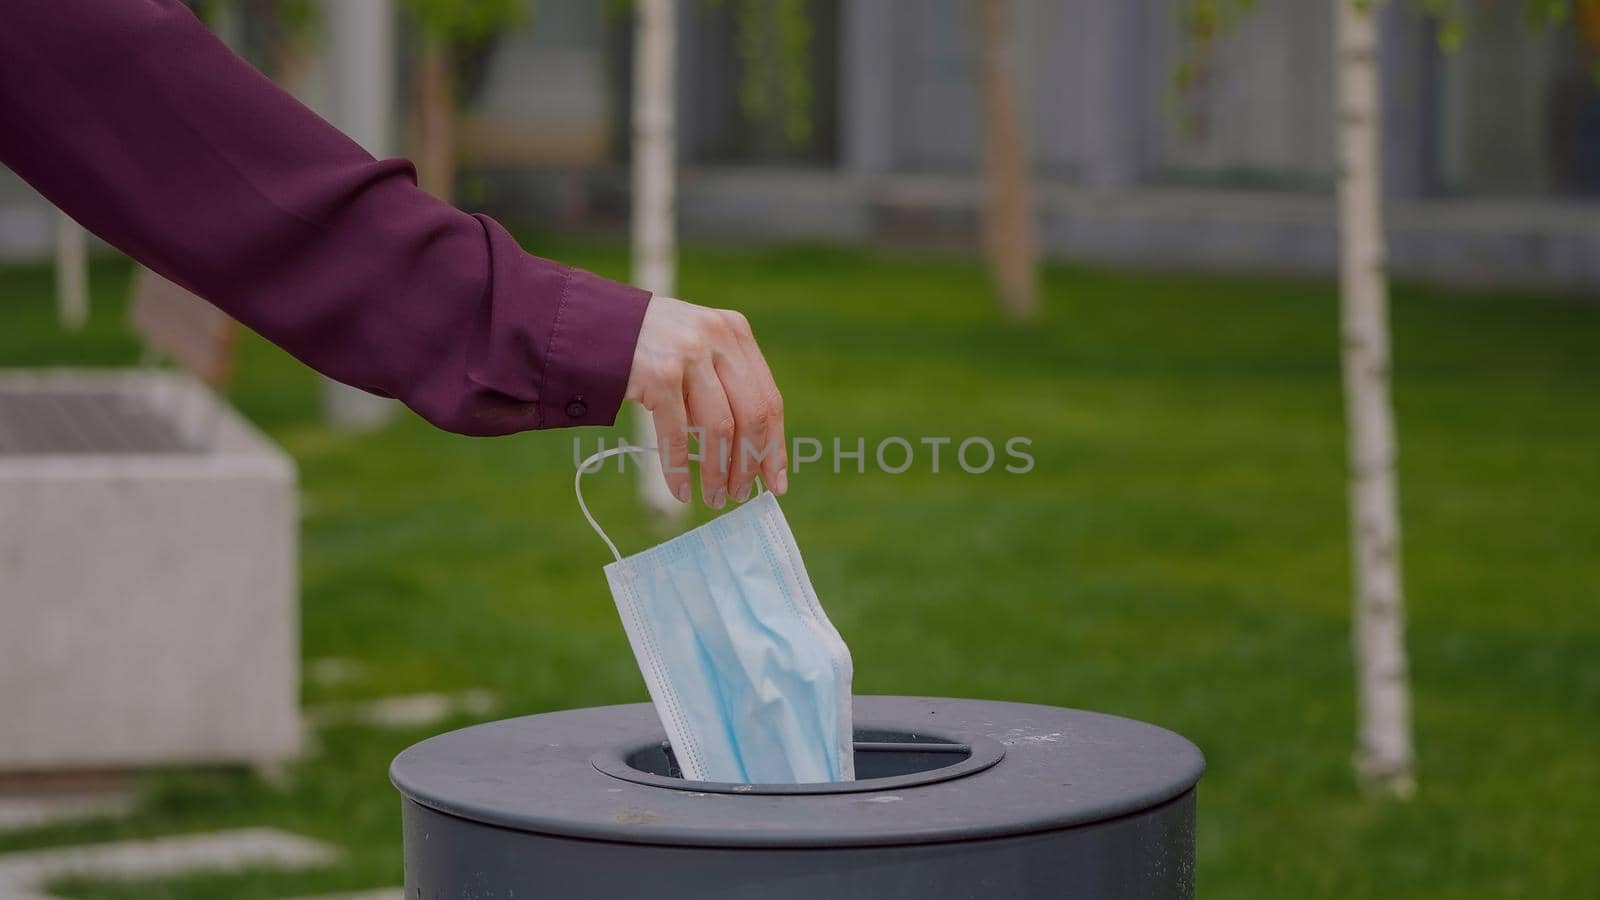 Woman throws a medical surgical mask into the trash outdoors by RecCameraStock